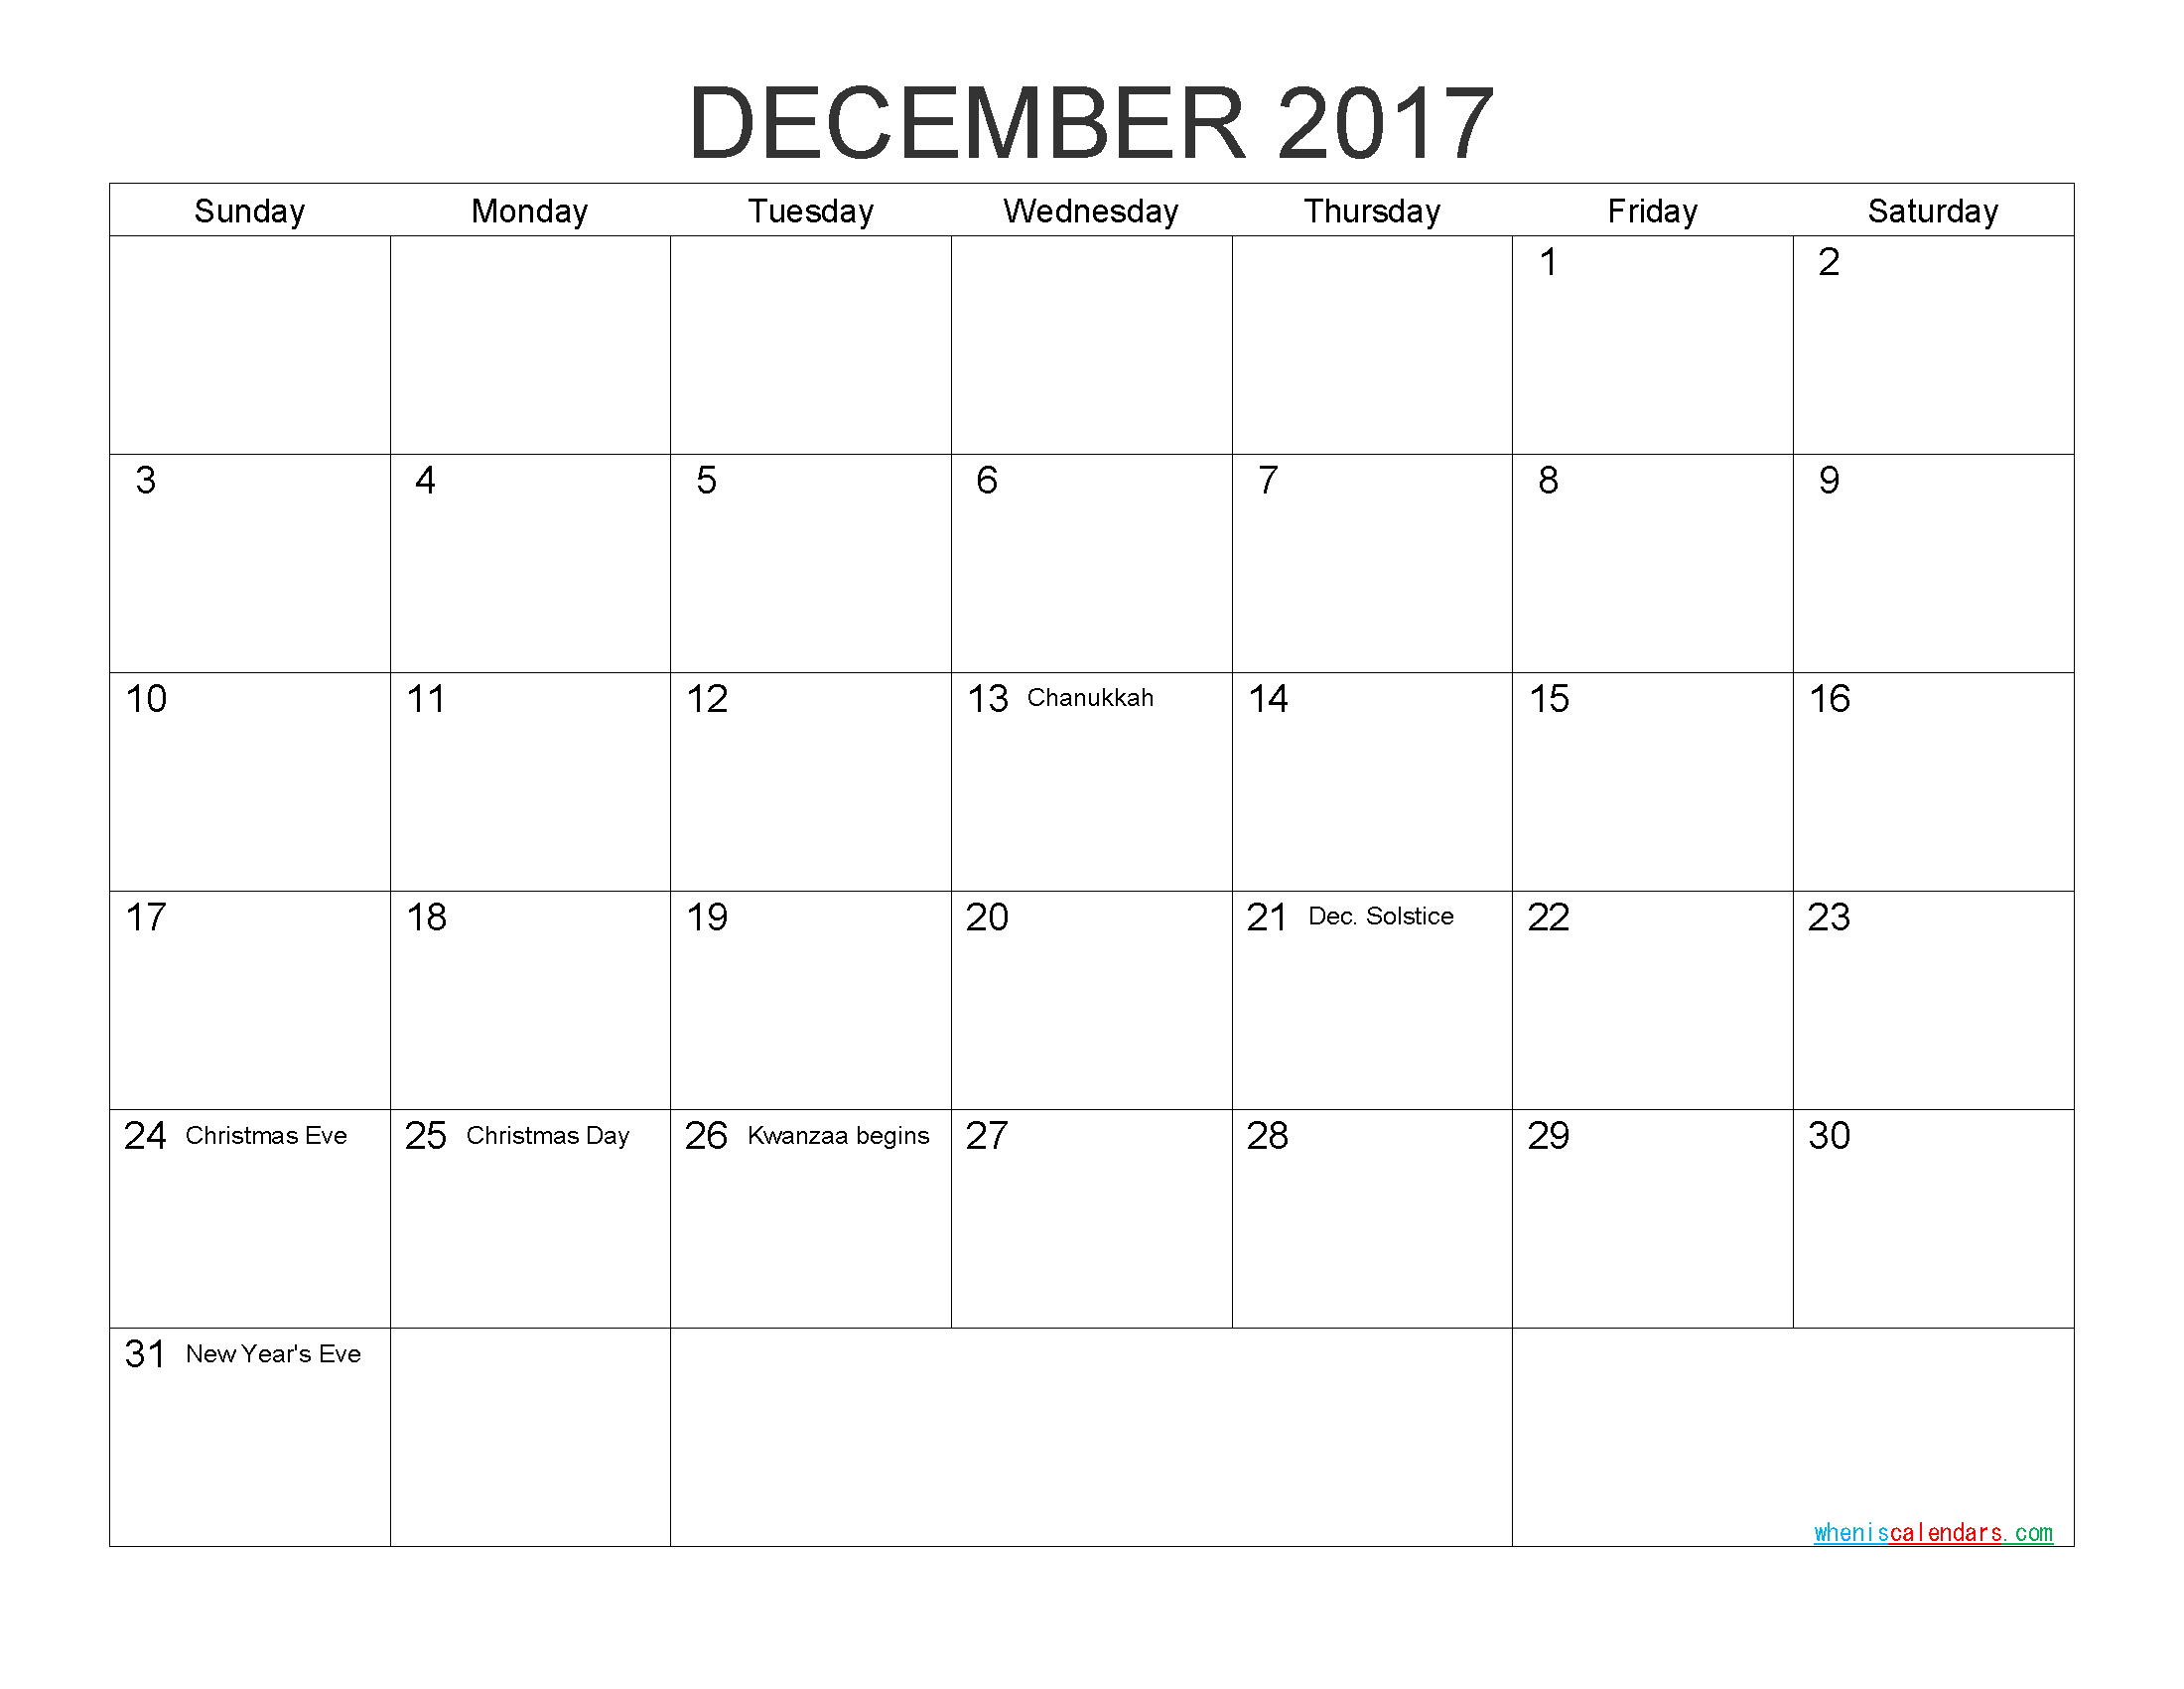 Download Free Calendar December 2017 Printable Calendar with Holidays as PDF and Image